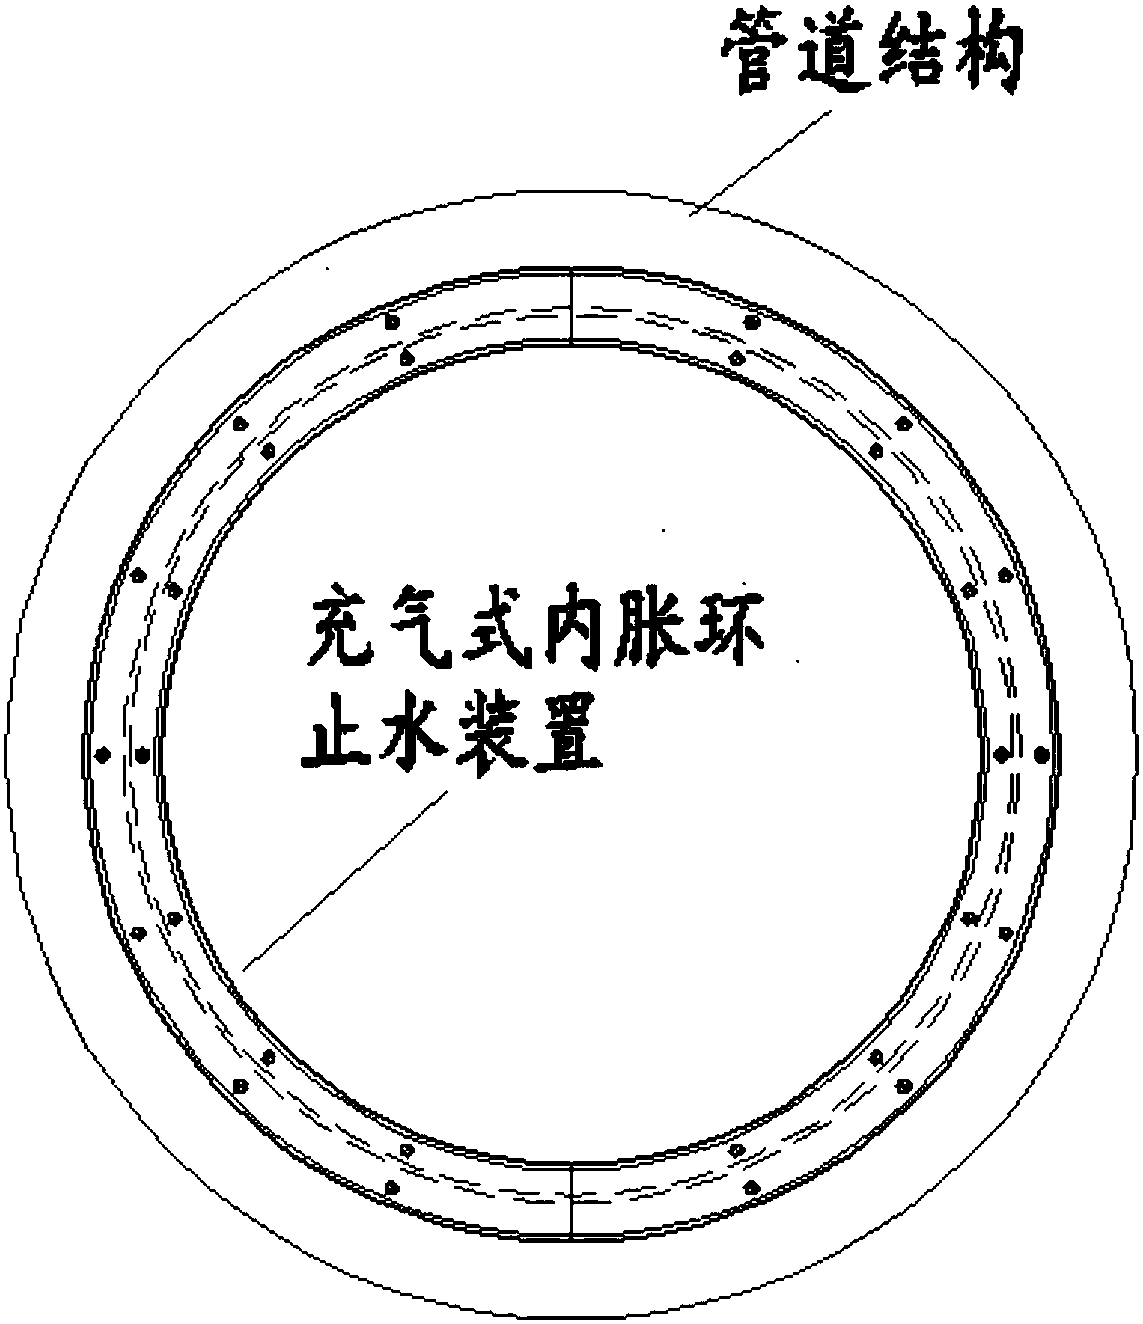 Inflatable type water-stop internal expanding ring device for restoring underground pipeline water seepage